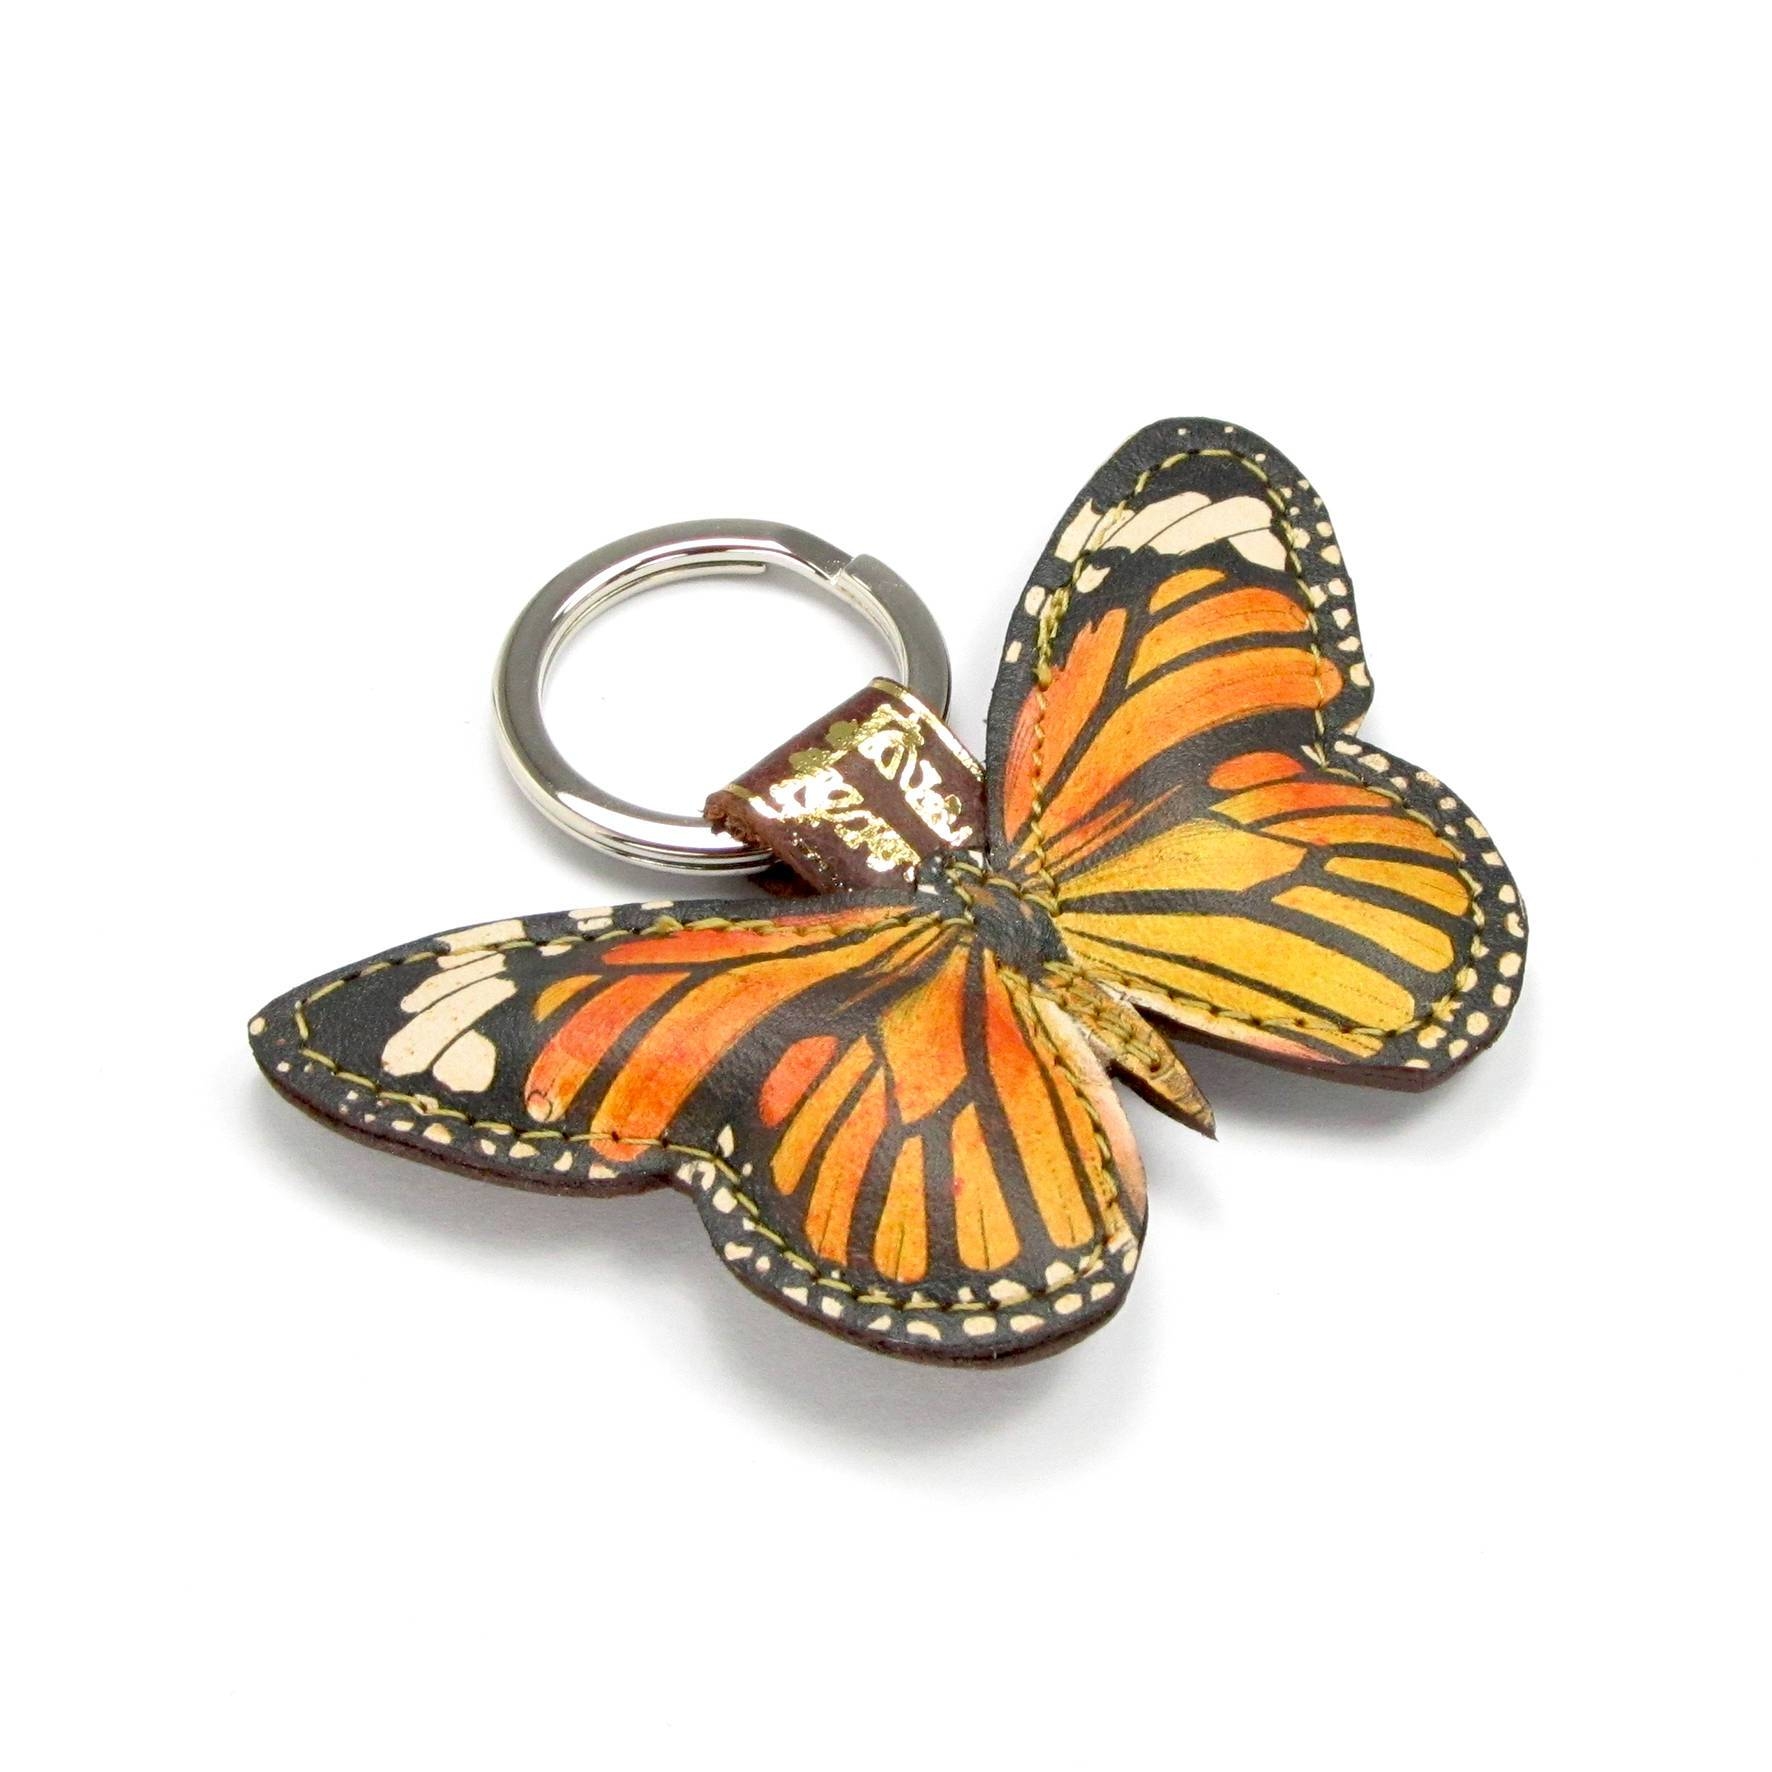 Leather Key Ring / Bag Charm – Monarch Butterfly – Brown